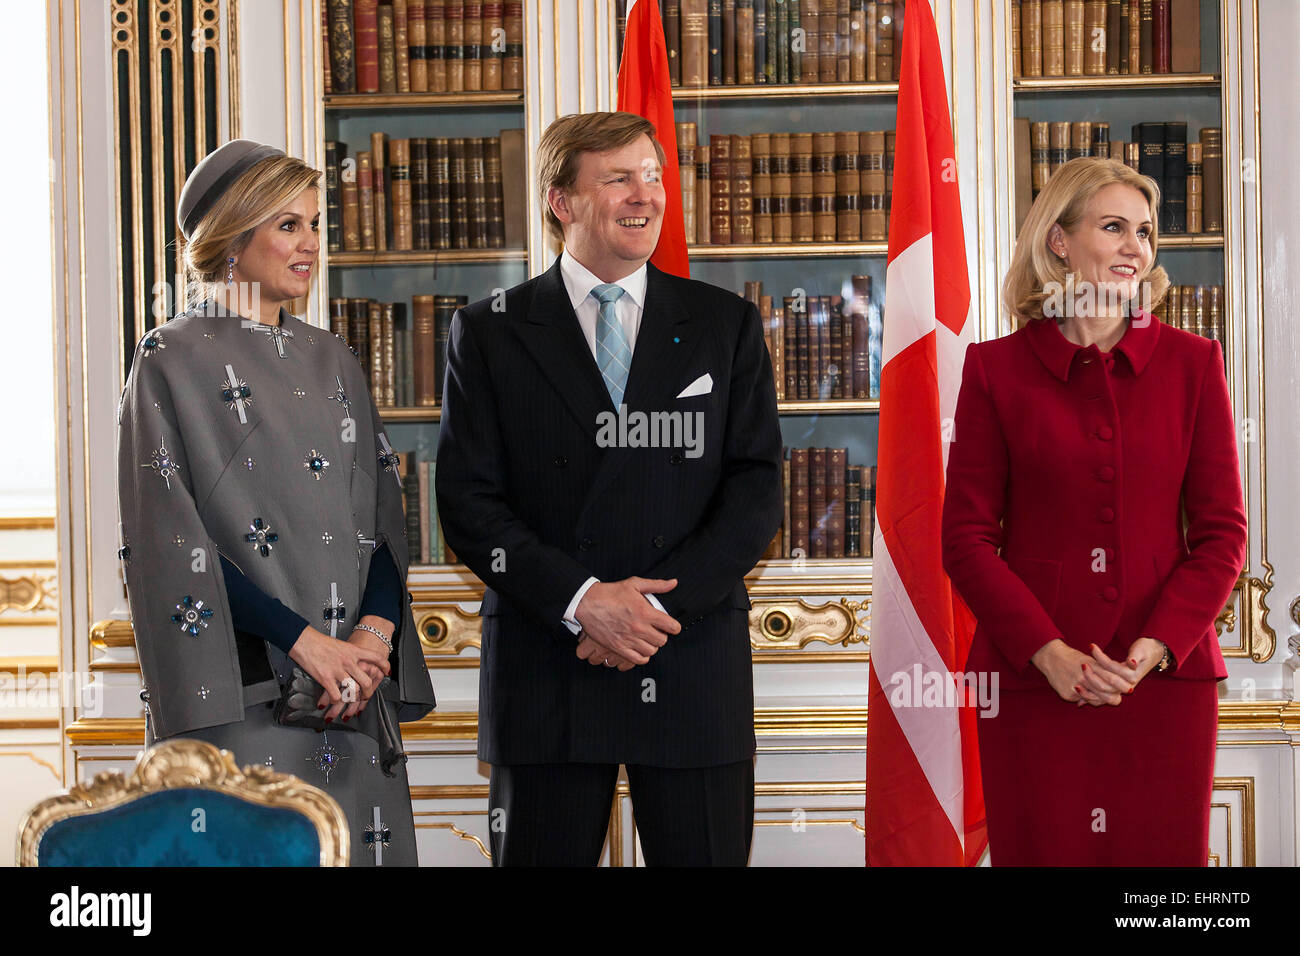 Copenhagen, Denmark. 17th March, 2015. Dutch King Willem-Alexander and Queen Máxma meets Danish PM, Helle Thorning-Schmidt, during their 2 days state visits to Denmark. Here they meets in The Queen's Library at the Prime Minister’s Office Credit:  OJPHOTOS/Alamy Live News Stock Photo